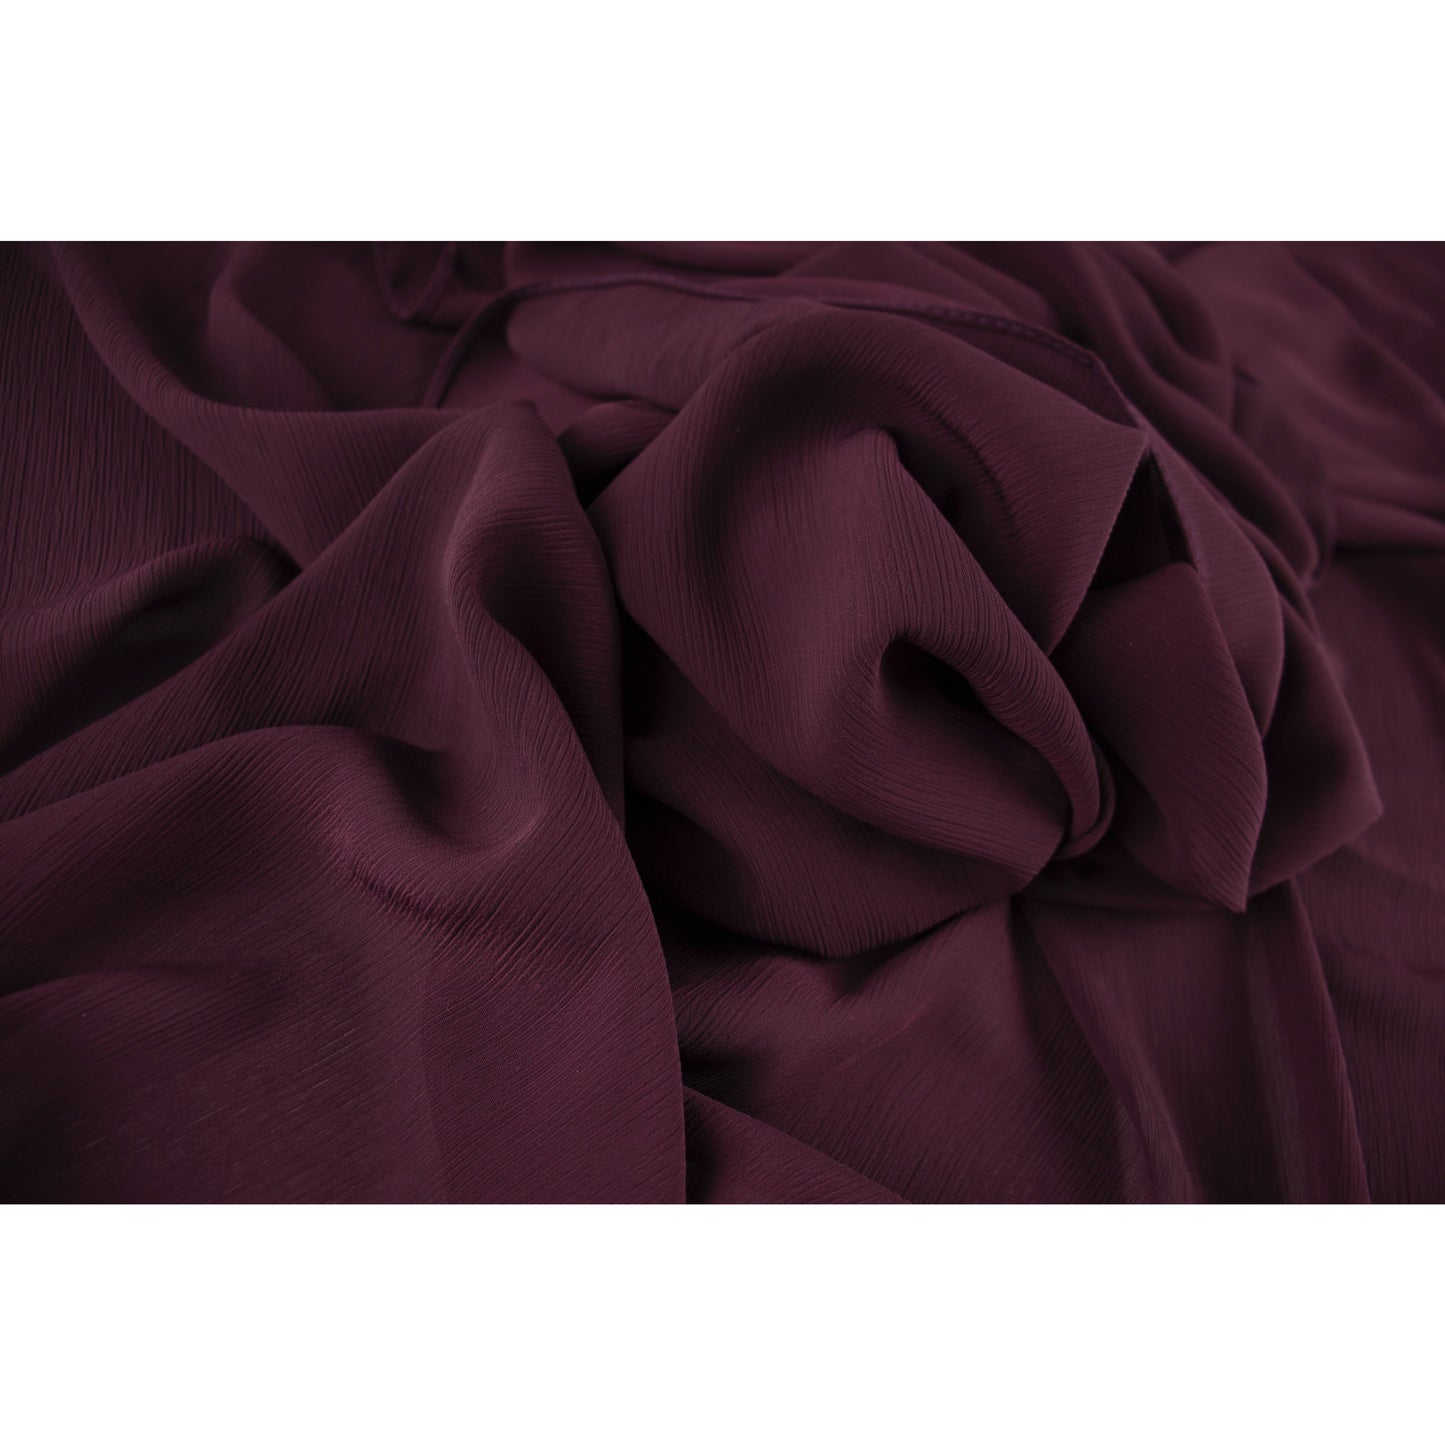 Chiffon - Vineyard Grape - Modestia Collection is a Detroit scarf based brand with a curated for Detroiter's and to the eclectic style of scarf lovers around the globe.